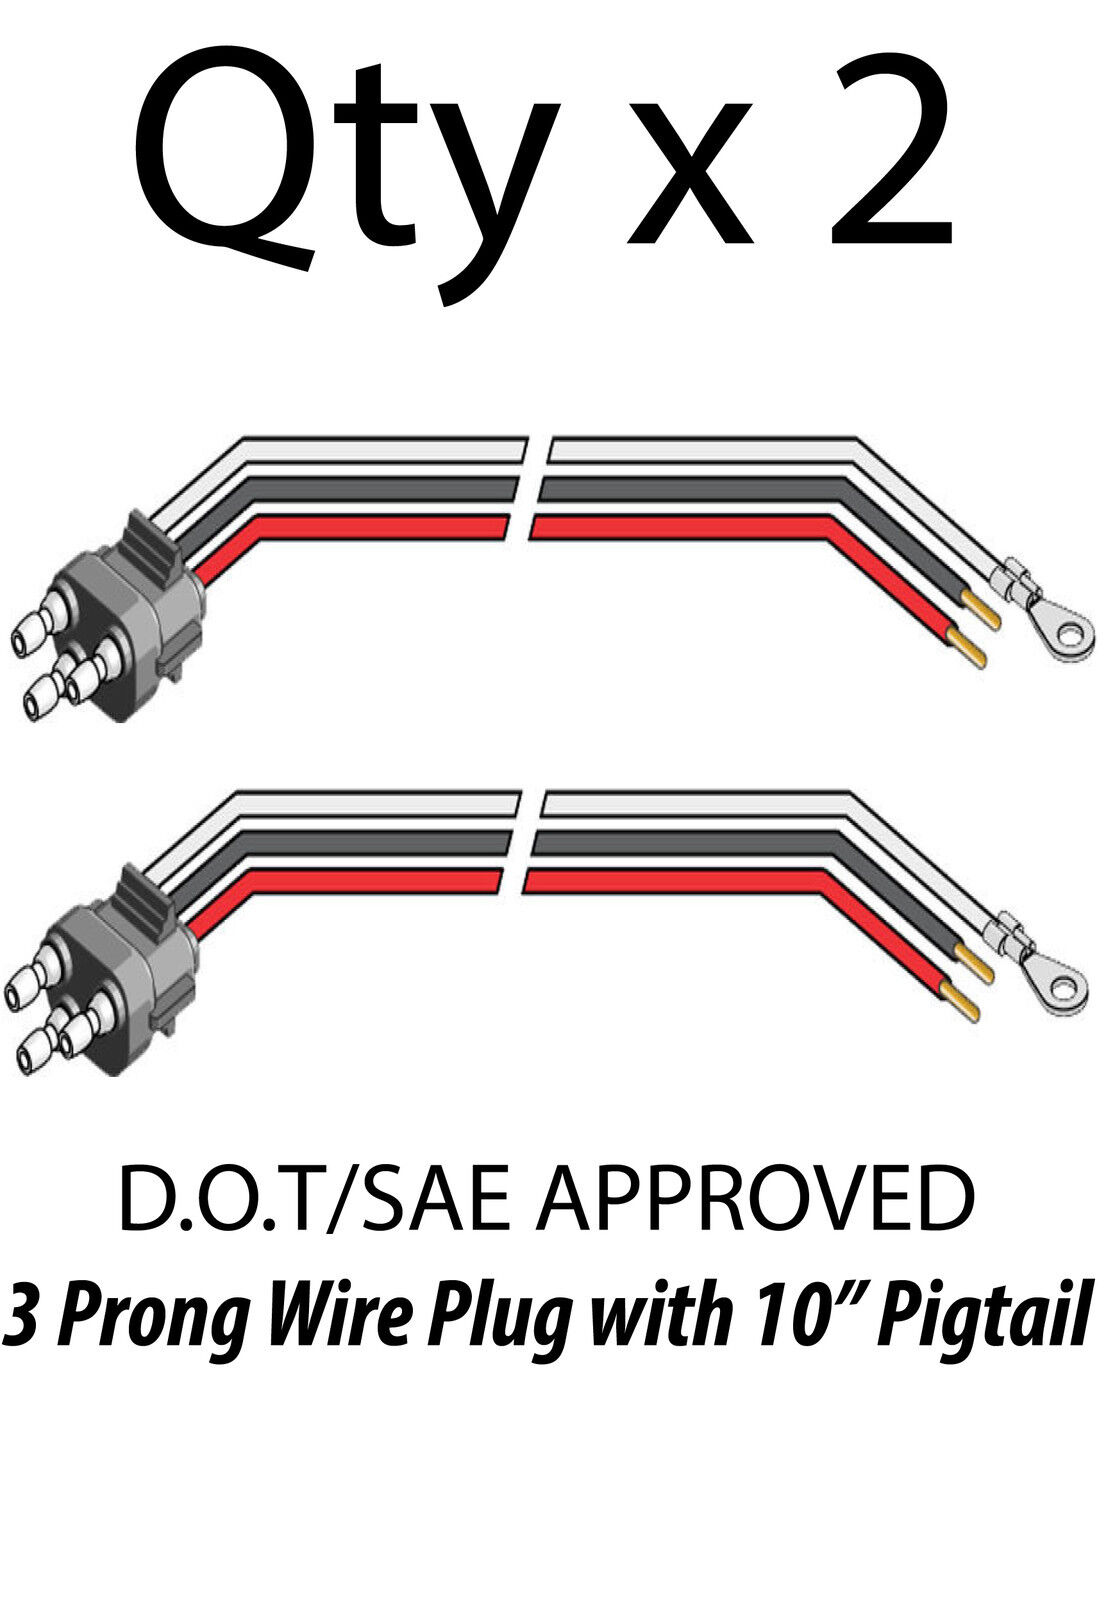 3 Prong Pigtail Wire Plug for Truck Trailer Stop Turn Tail Lights - Qty 2